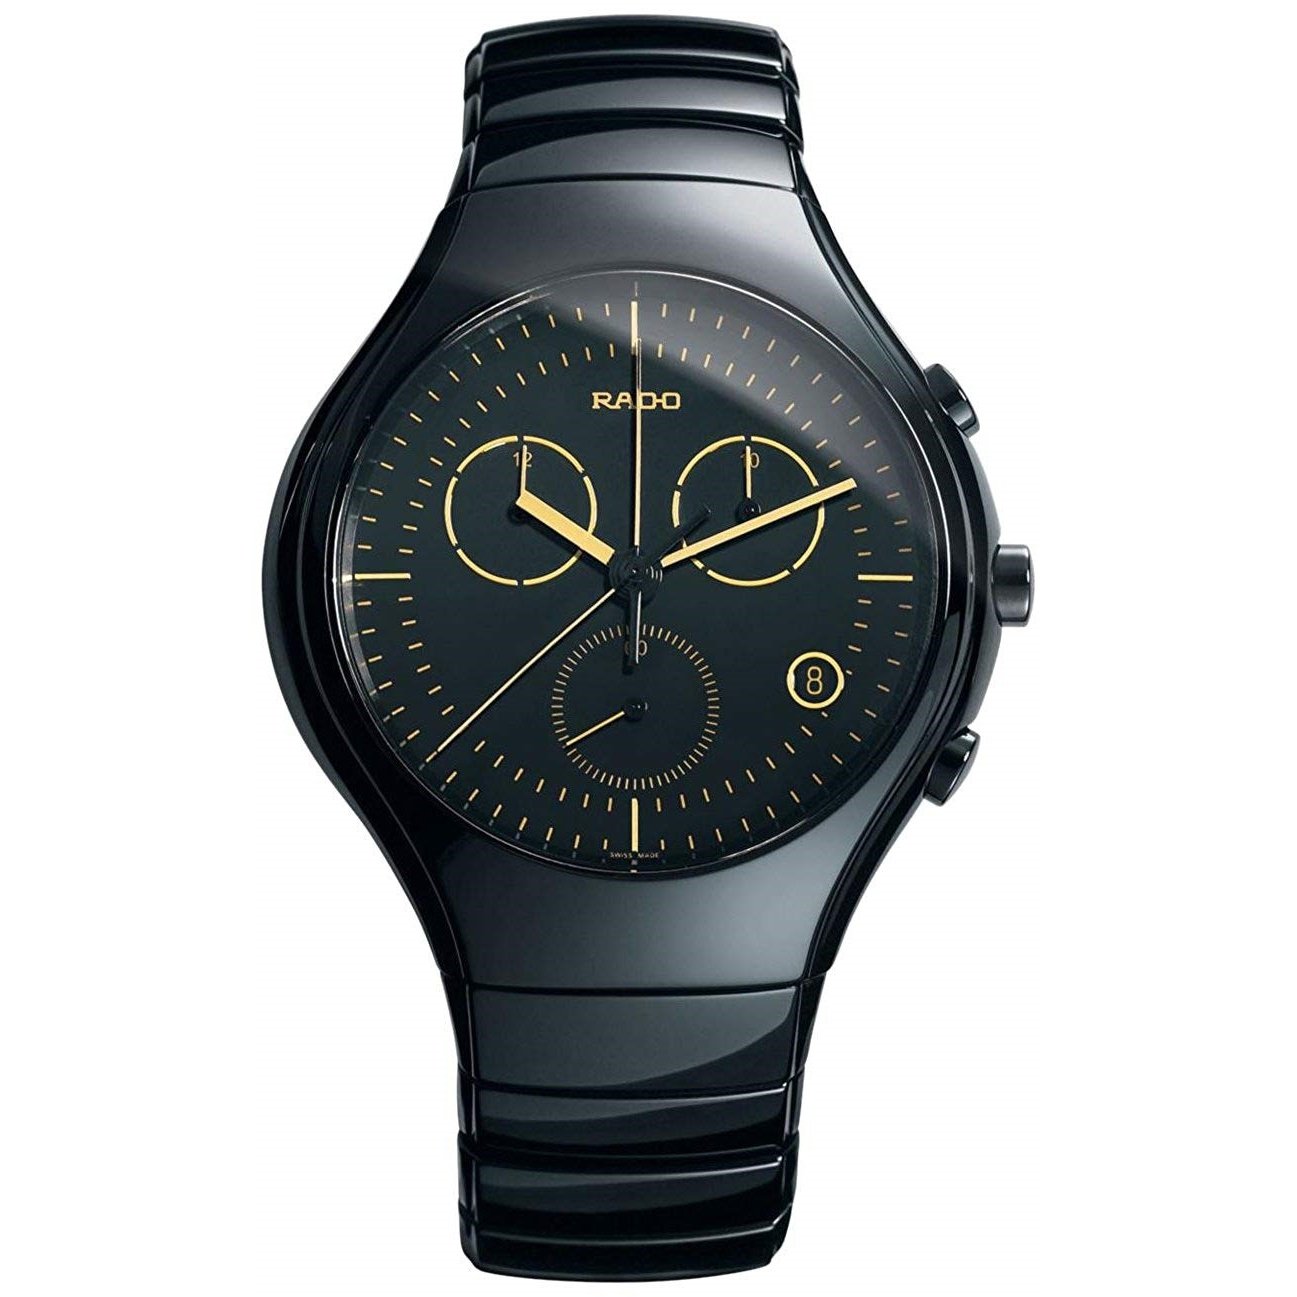 Round Rado Ceramic Black Watch For Man, For Personal Use at best